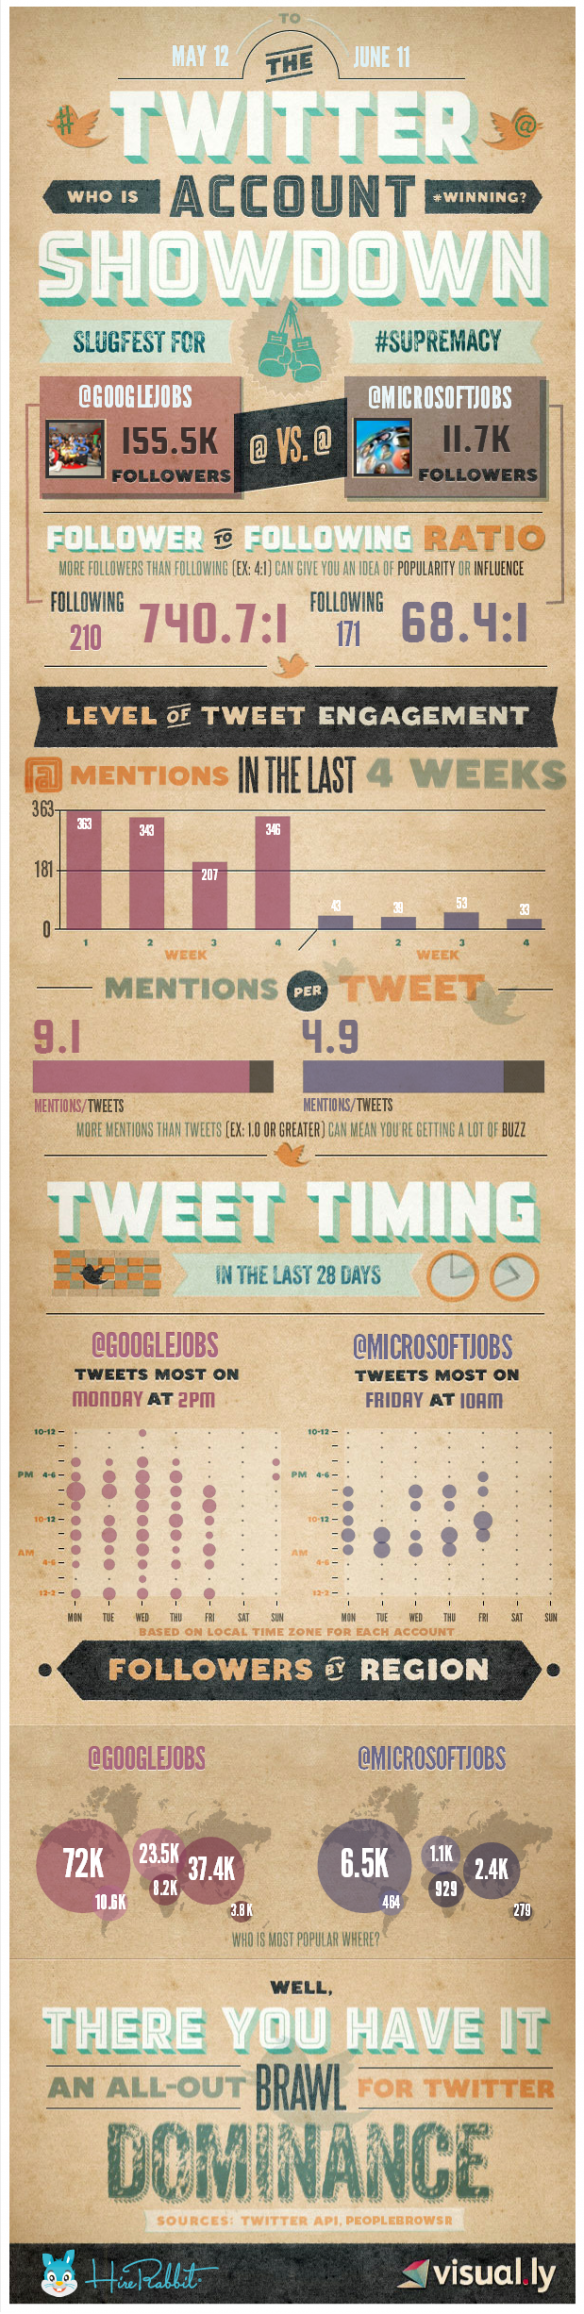 Google Vs. Microsoft - Who is better at twitter recruiting